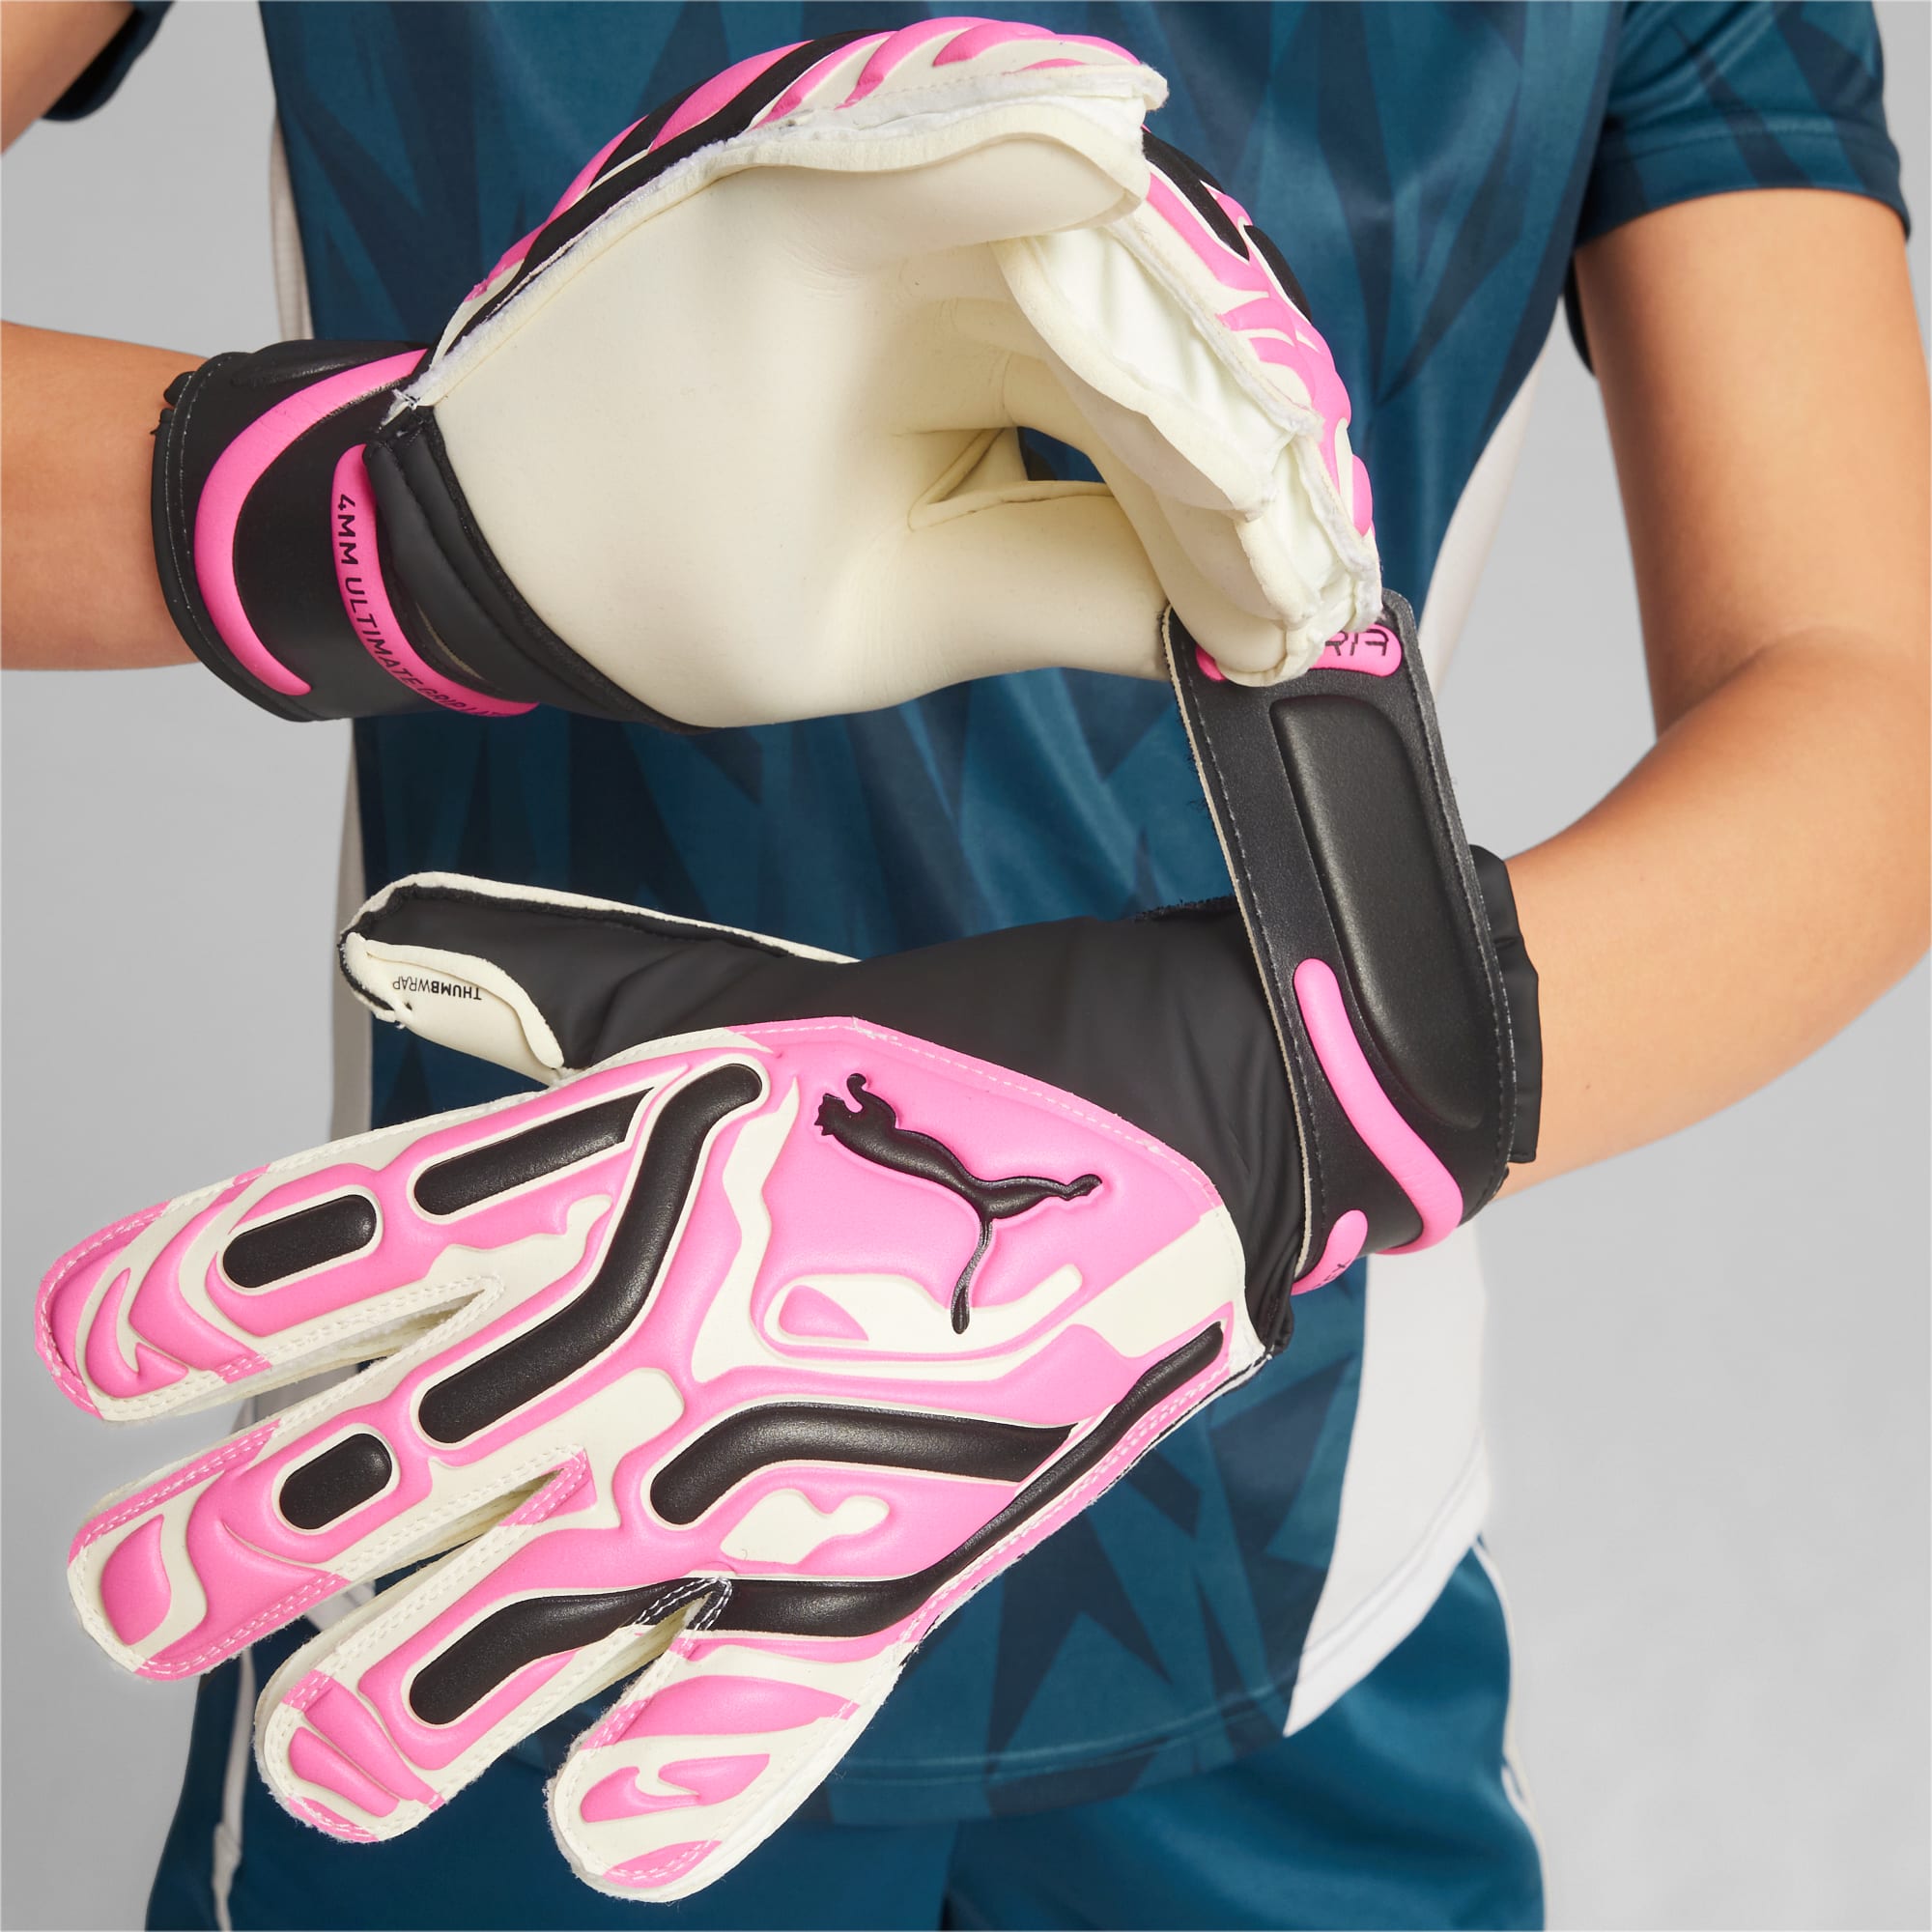 PUMA Ultra Match Protect Youth Goalkeeper Gloves, Poison Pink/White/Black